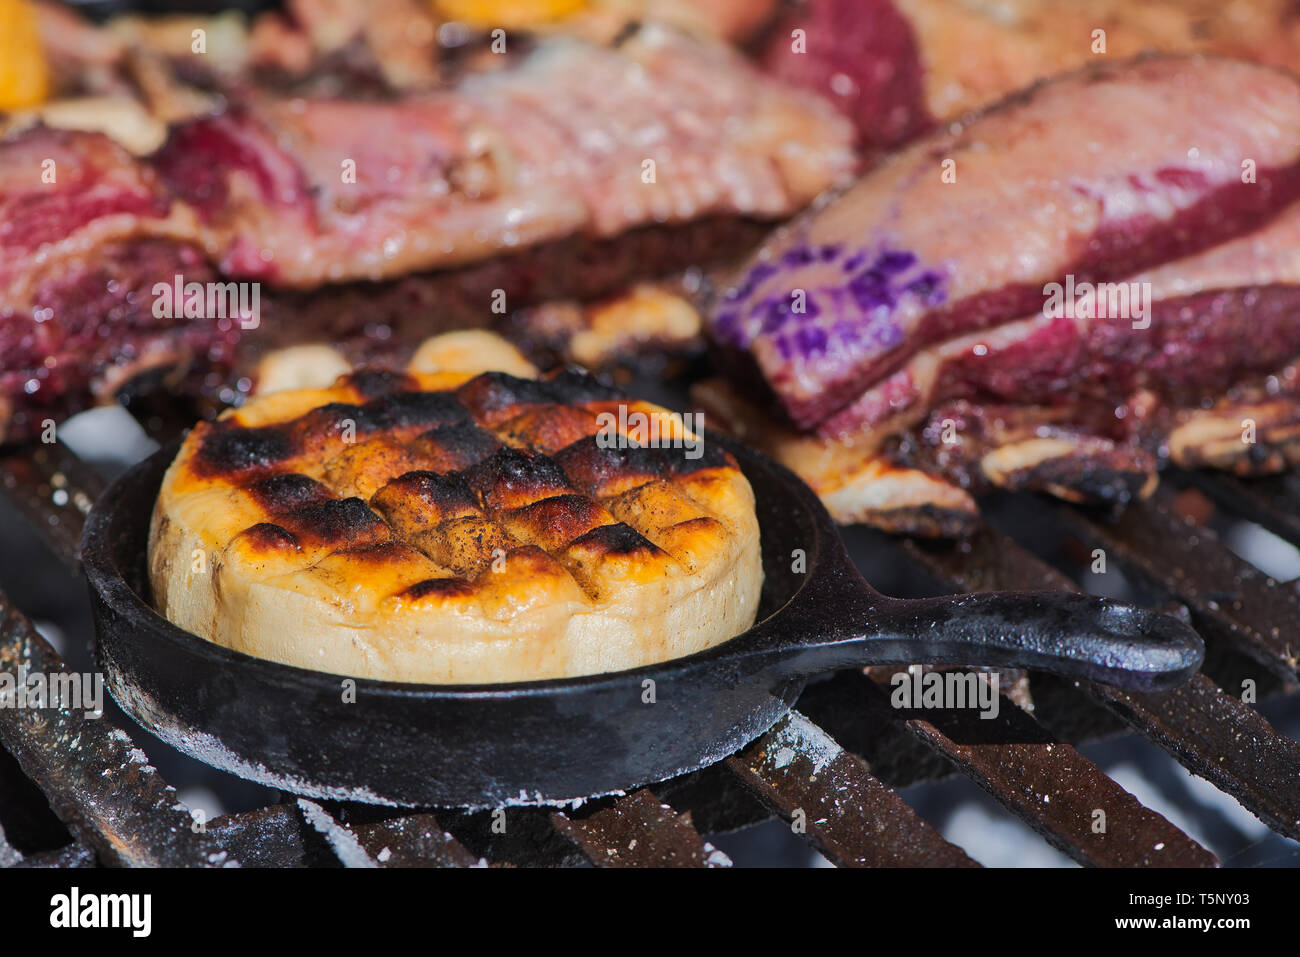 Delicious Argentinian Provolone Yarn Cheese (Provoleta) that is cooked in a cast iron skillet over the grill of a barbecue, Buenos Aires, Argentina Stock Photo